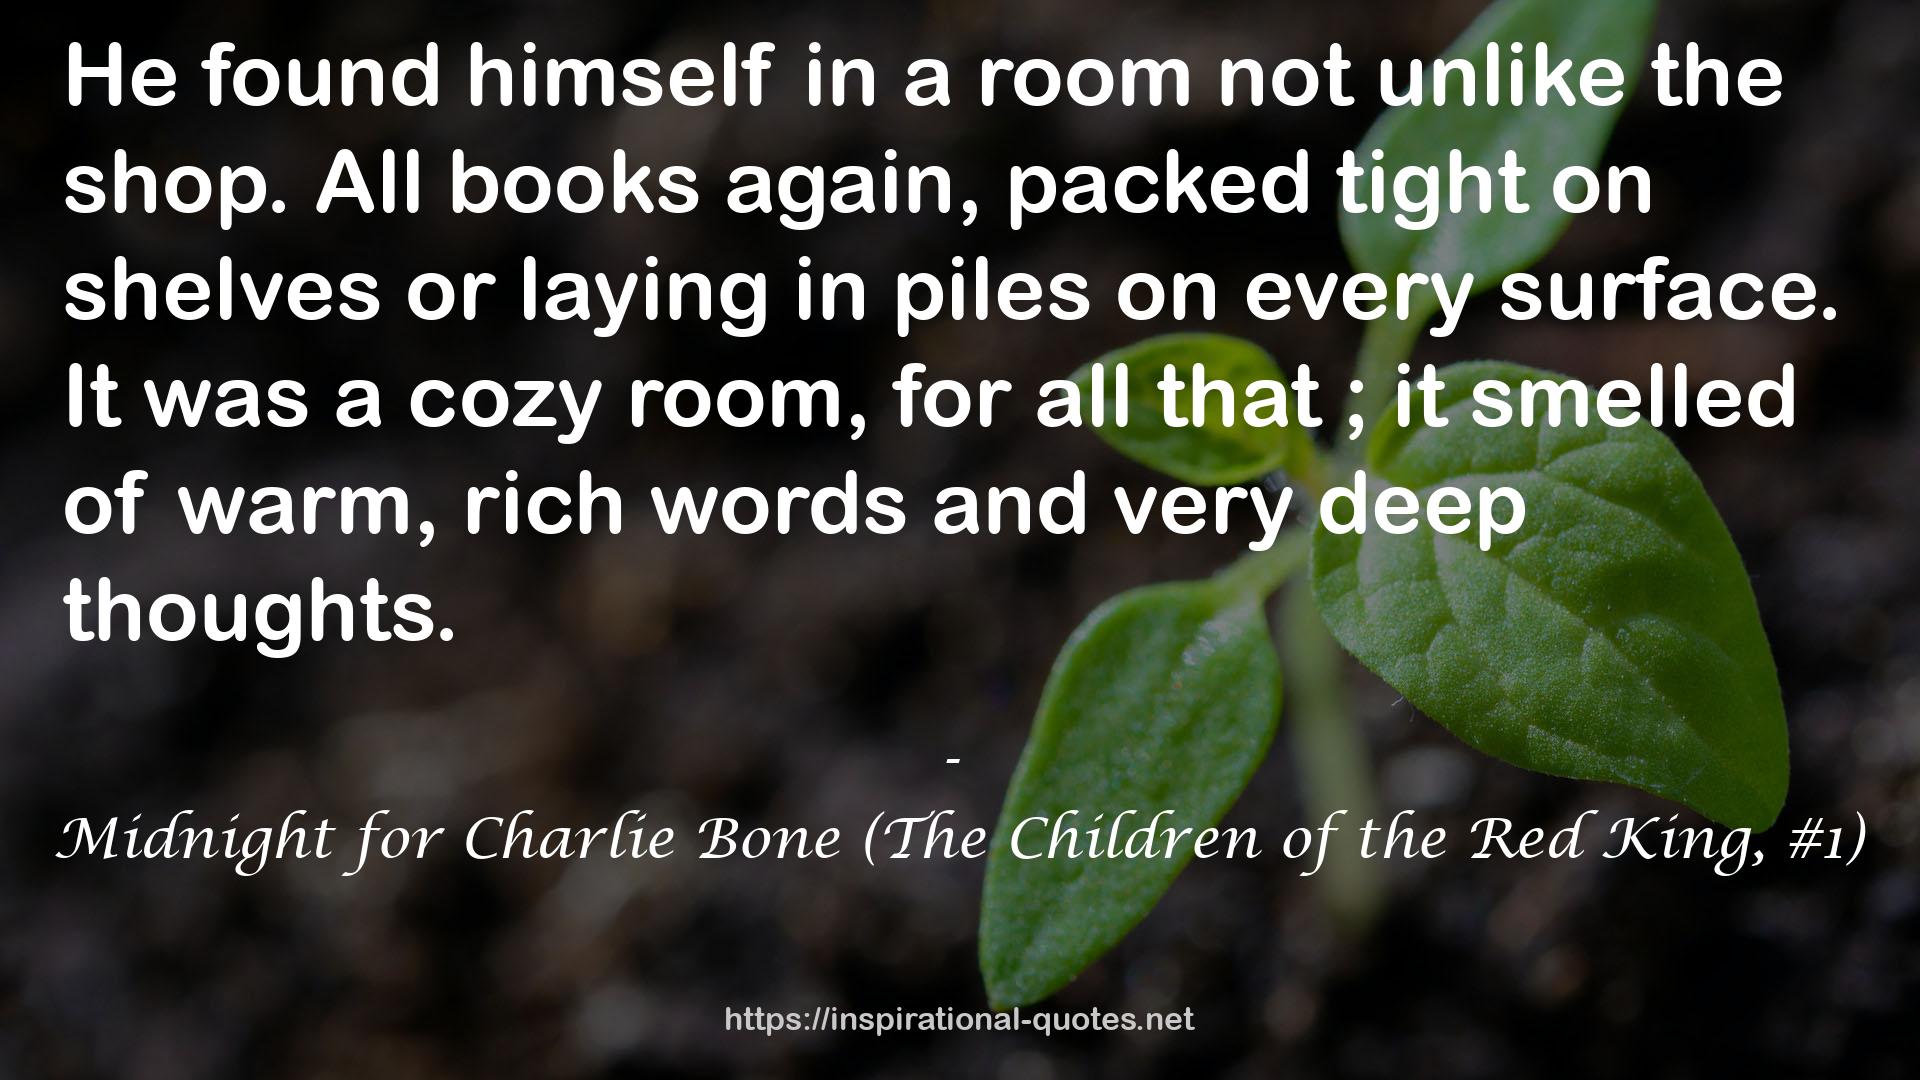 Midnight for Charlie Bone (The Children of the Red King, #1) QUOTES